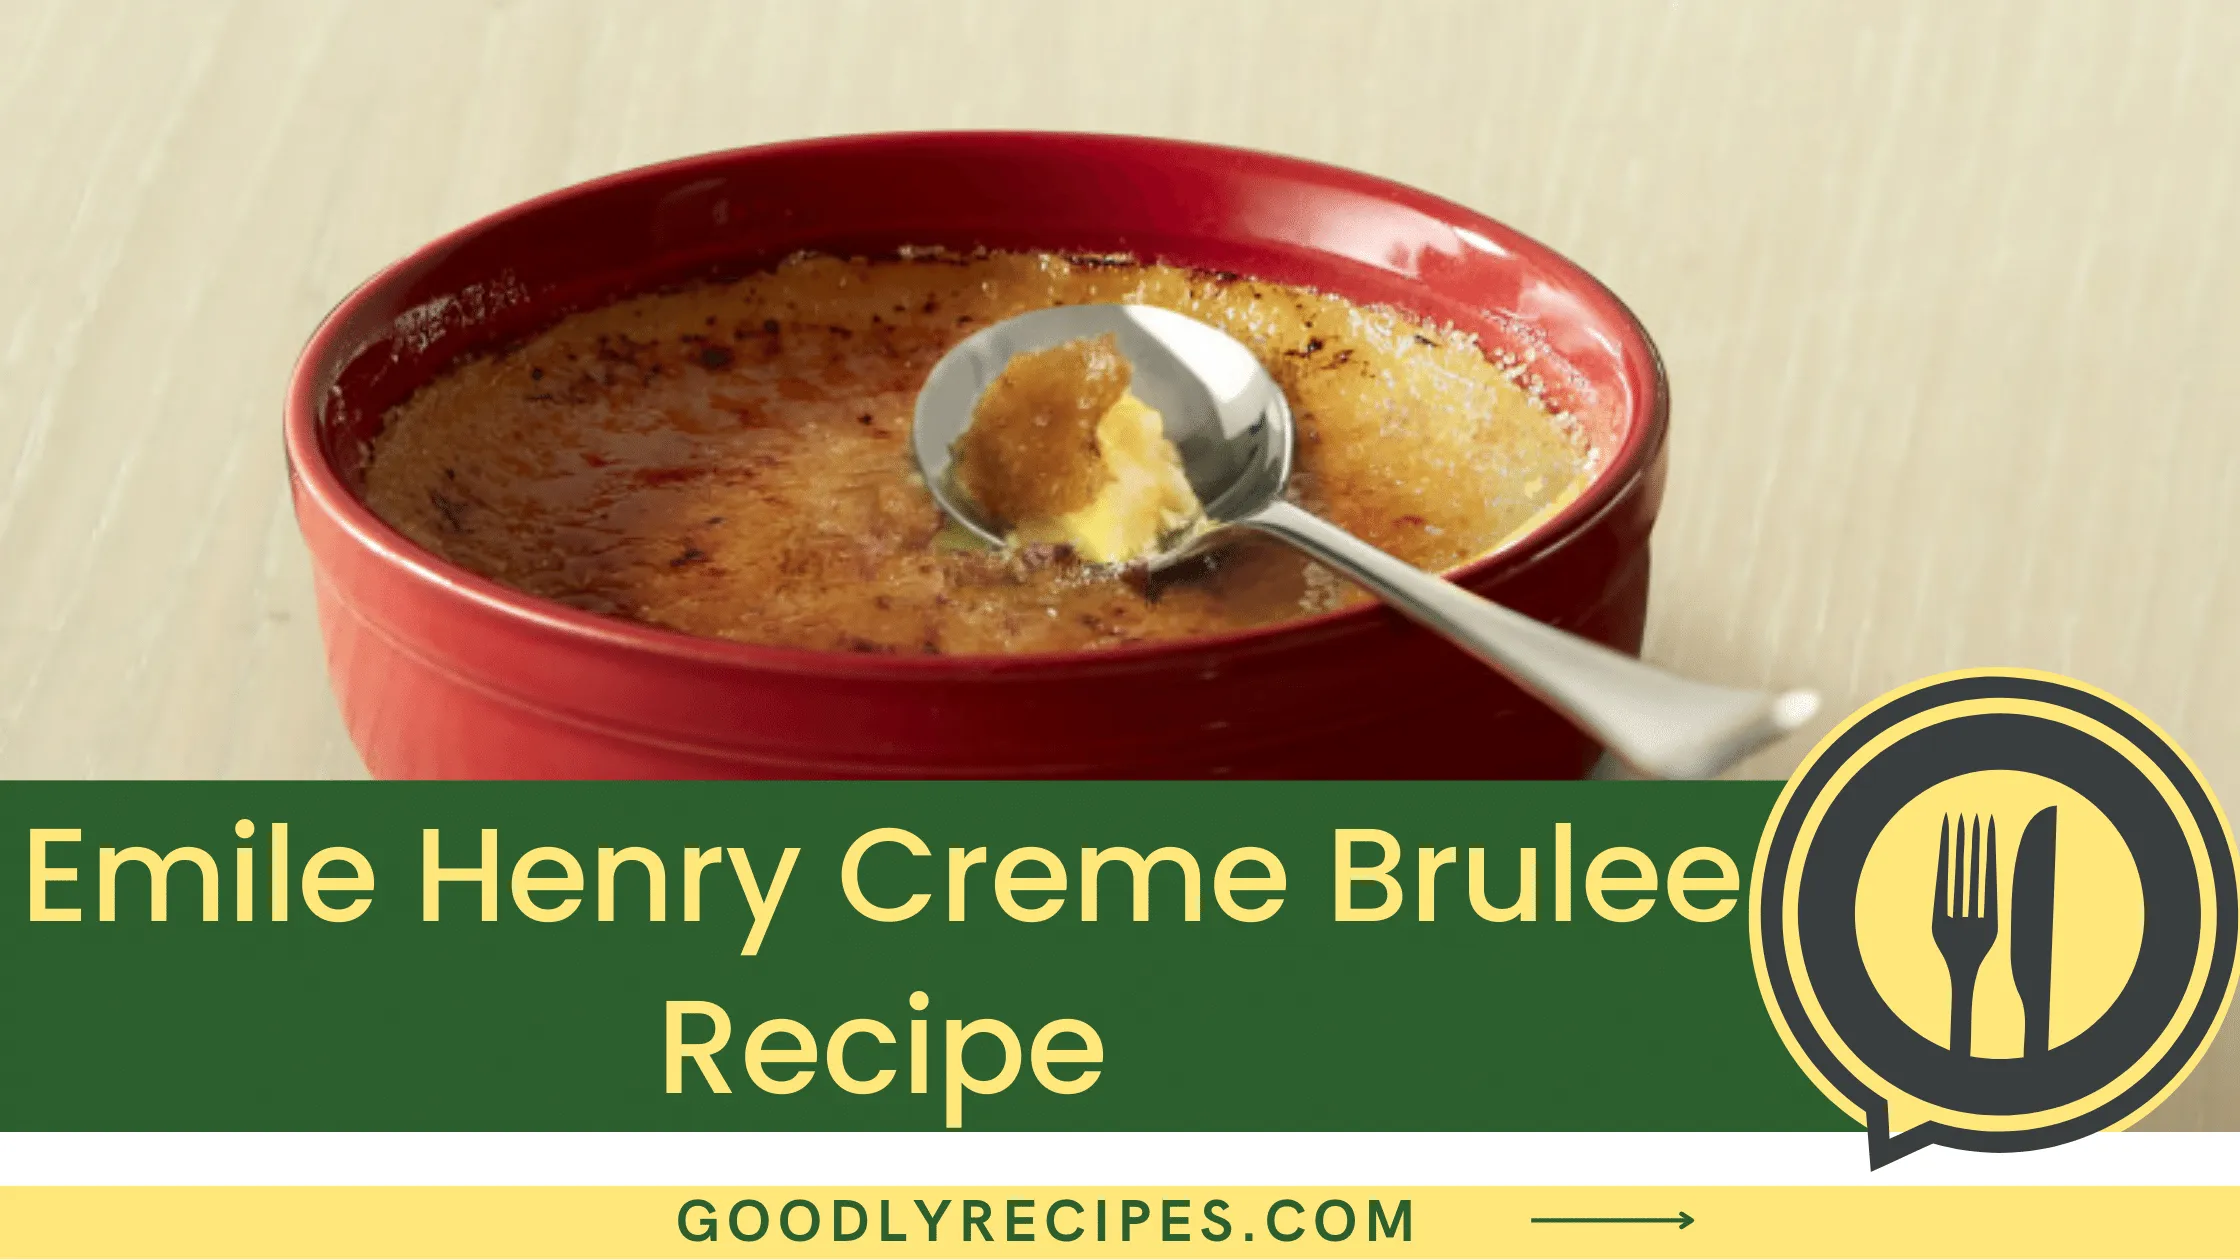 What is Emile Henry Creme Brulee?